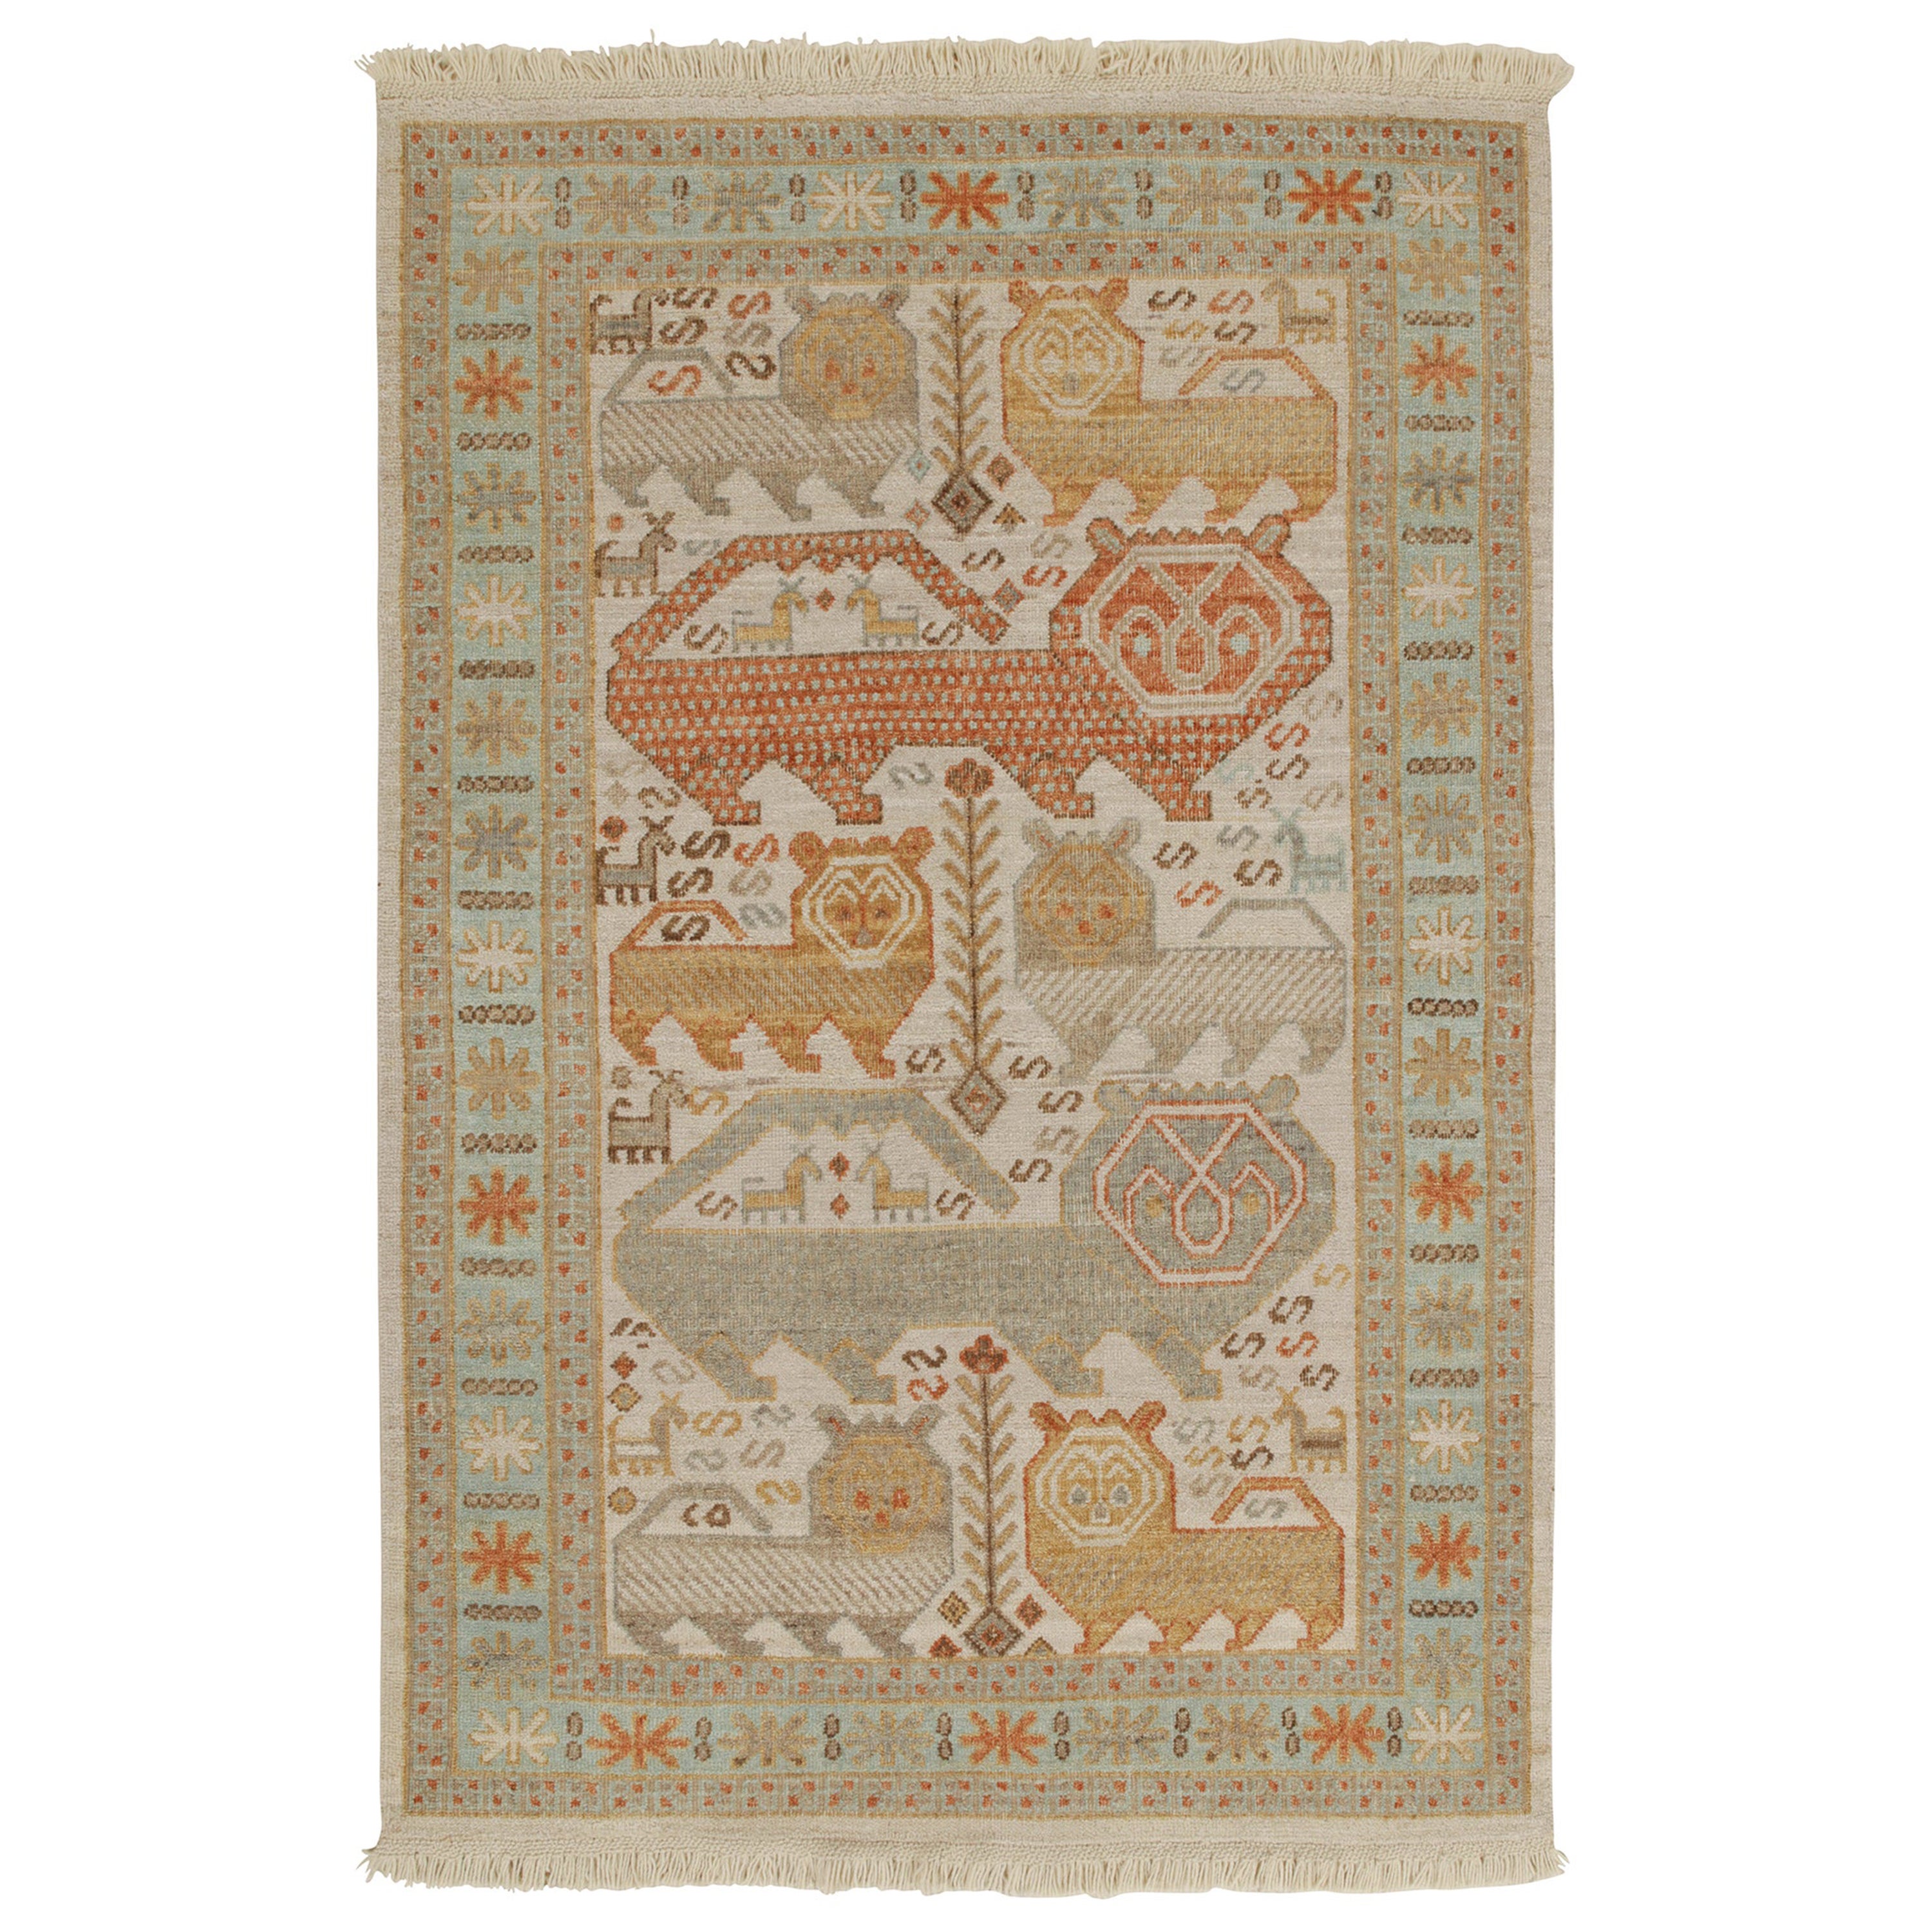 Rug & Kilim’s Tribal Style Rug in Beige-Brown, Blue and Red Pictorials For Sale